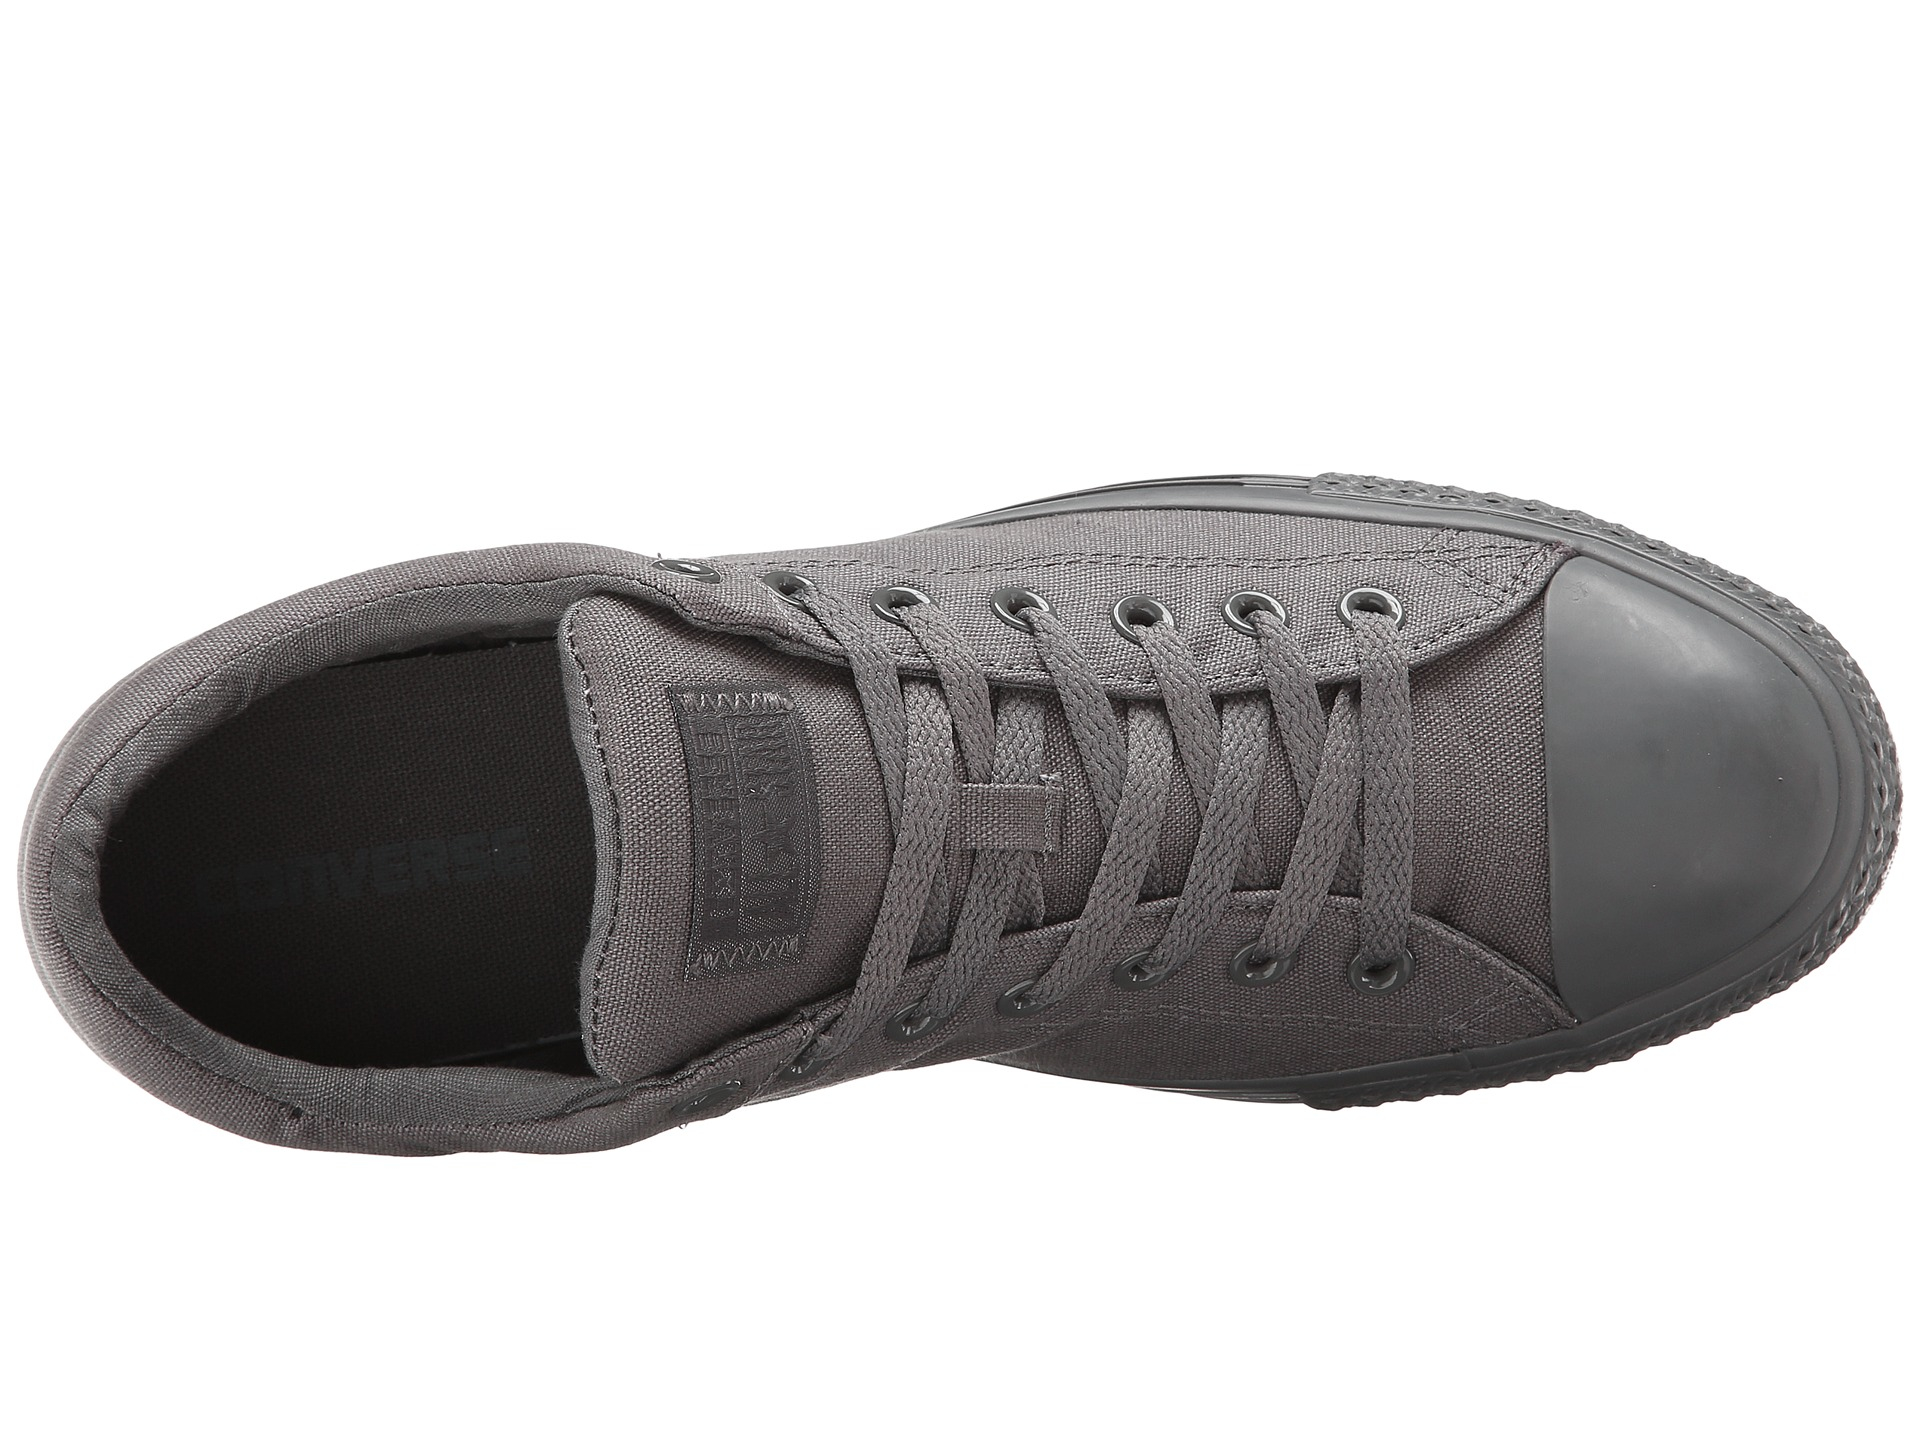 Converse Chuck Taylor® All Star® High Street Mono Canvas Ox in Gray | Lyst